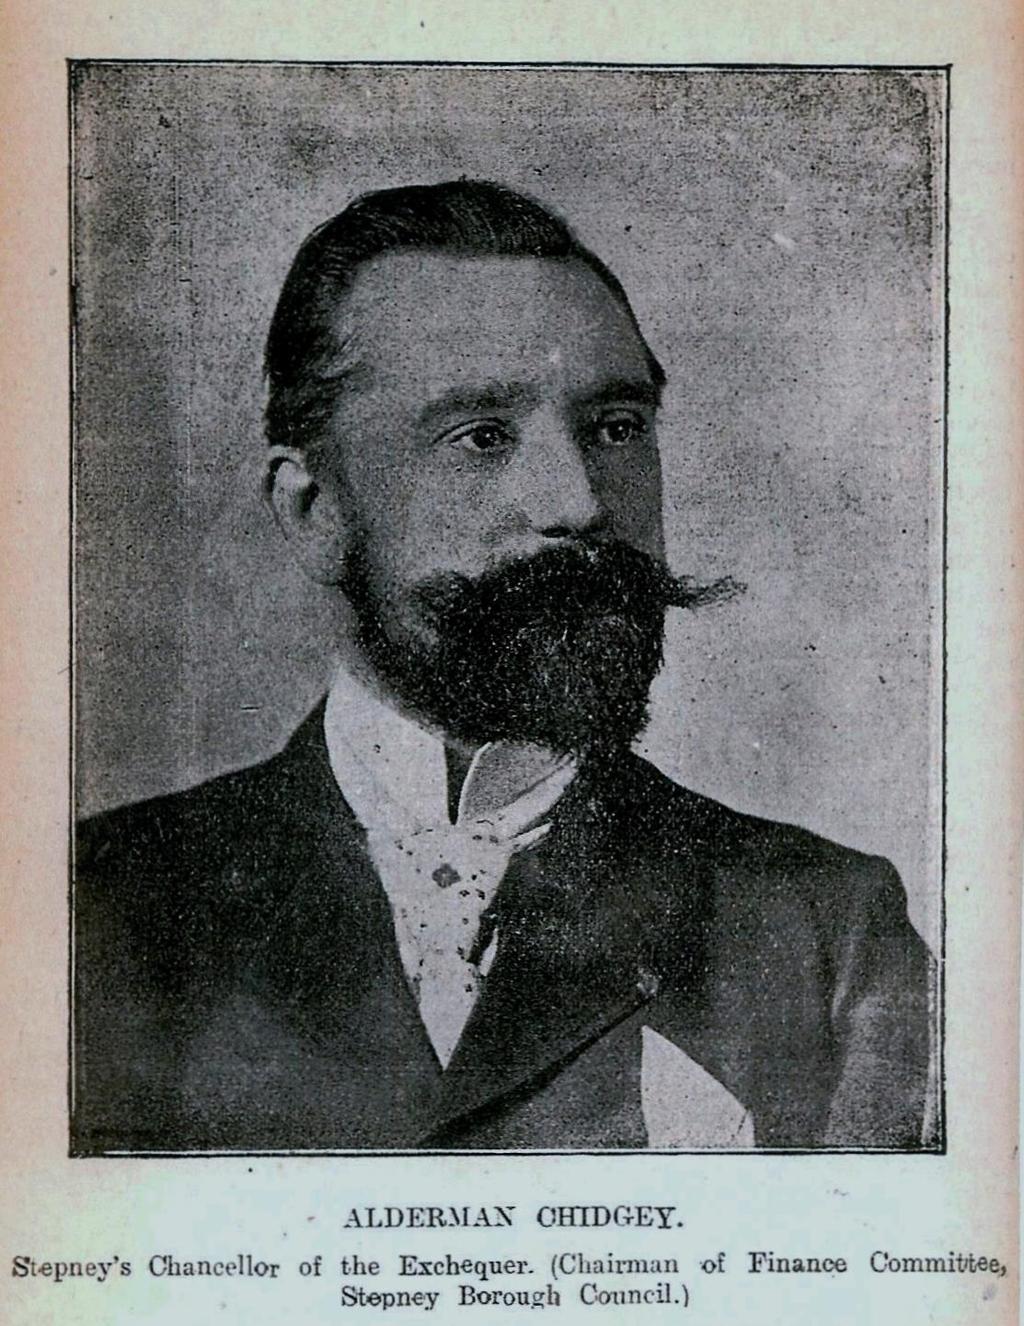 vestryman for the civil parish of Mile End Old Town. He became an Alderman for Stepney Borough Council and was the Chairman of the Finance Committee.